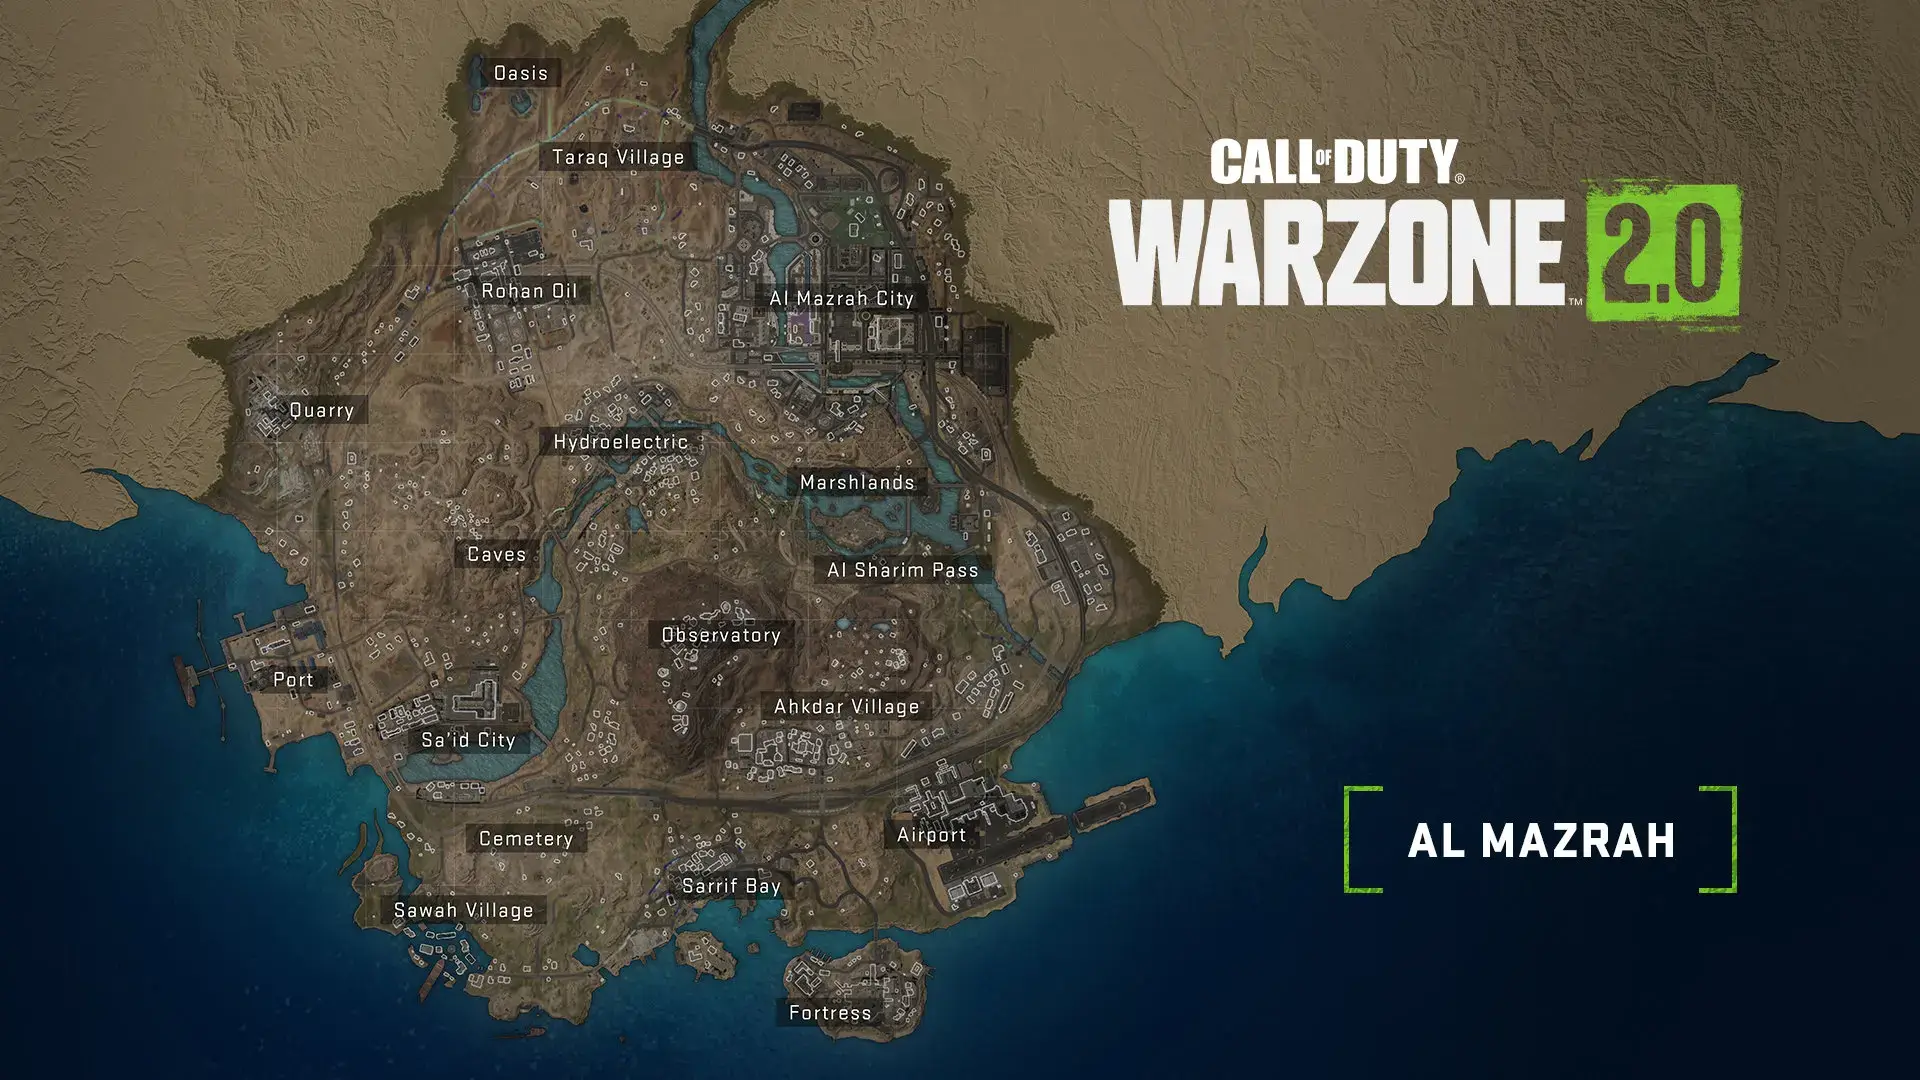 Al Mazrah will be the first battle royale map in Warzone 2